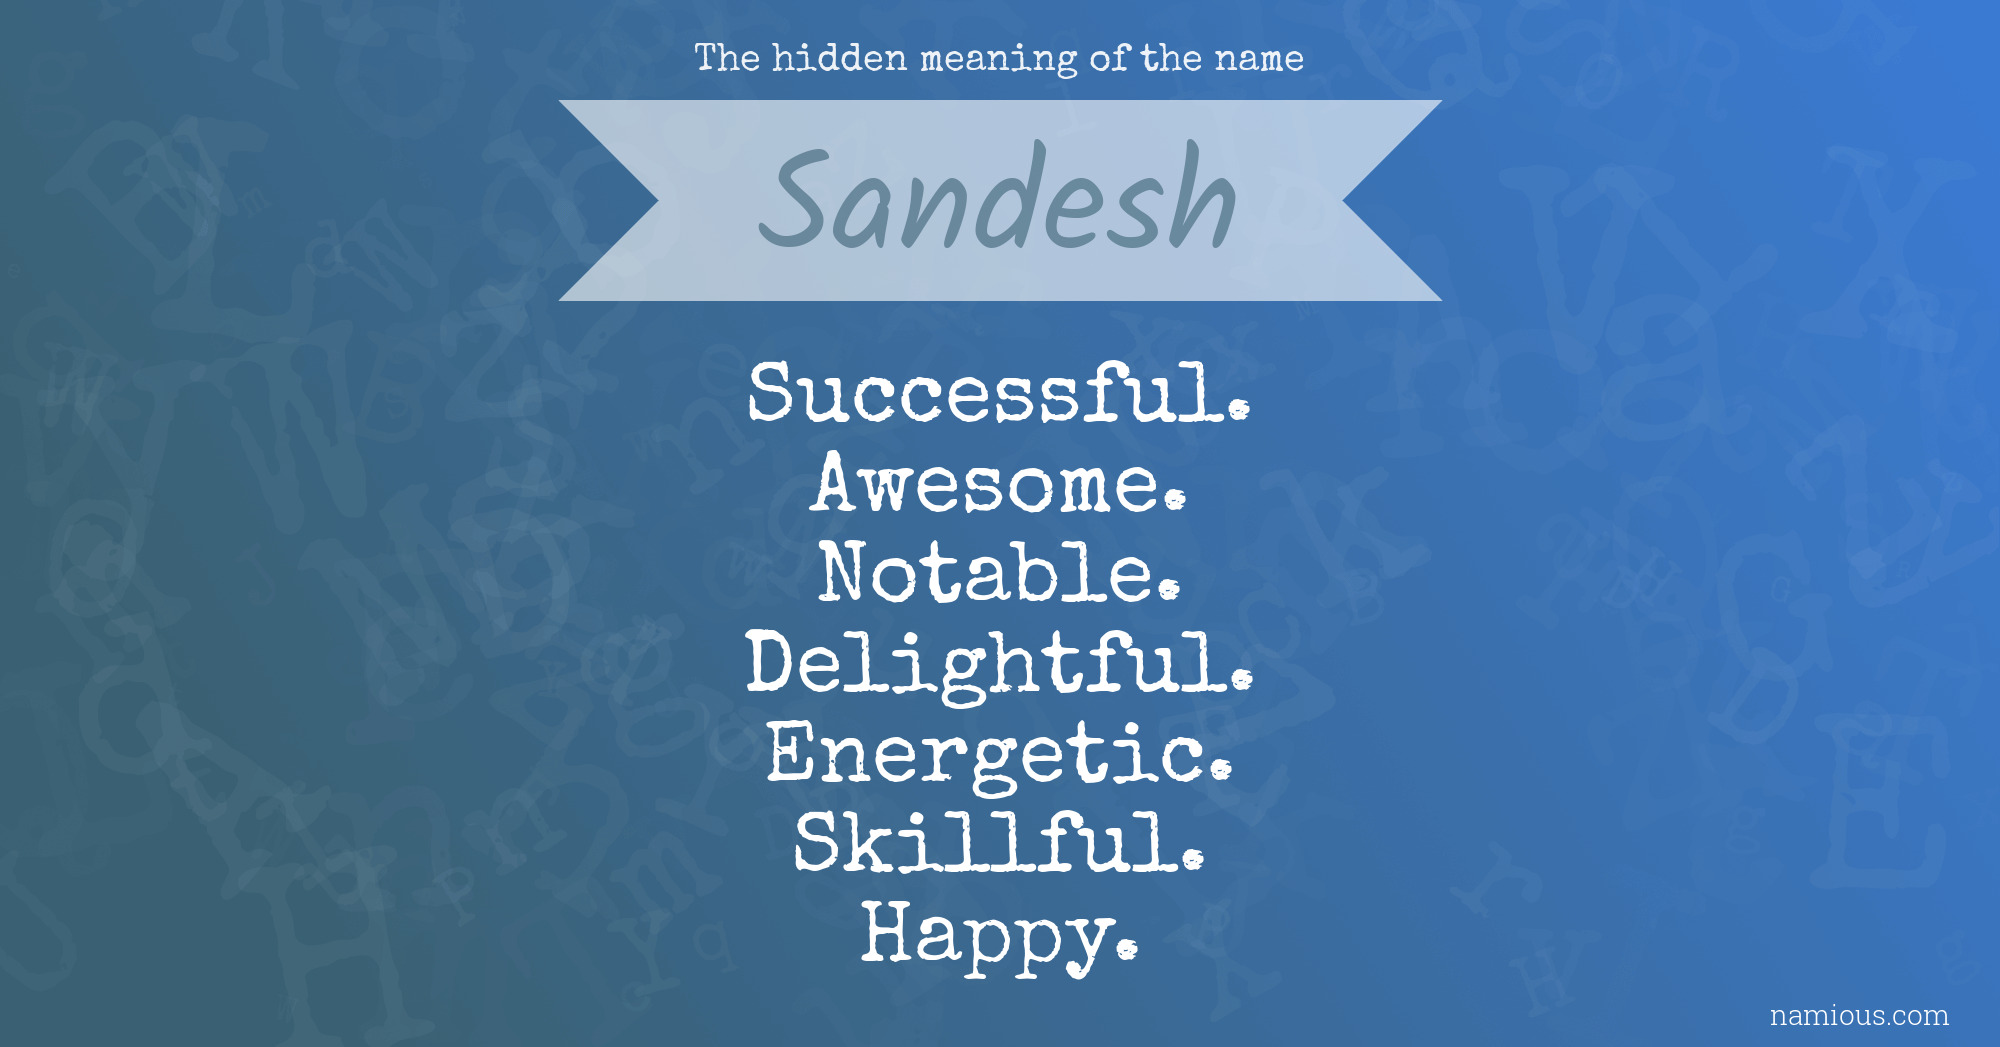 The hidden meaning of the name Sandesh